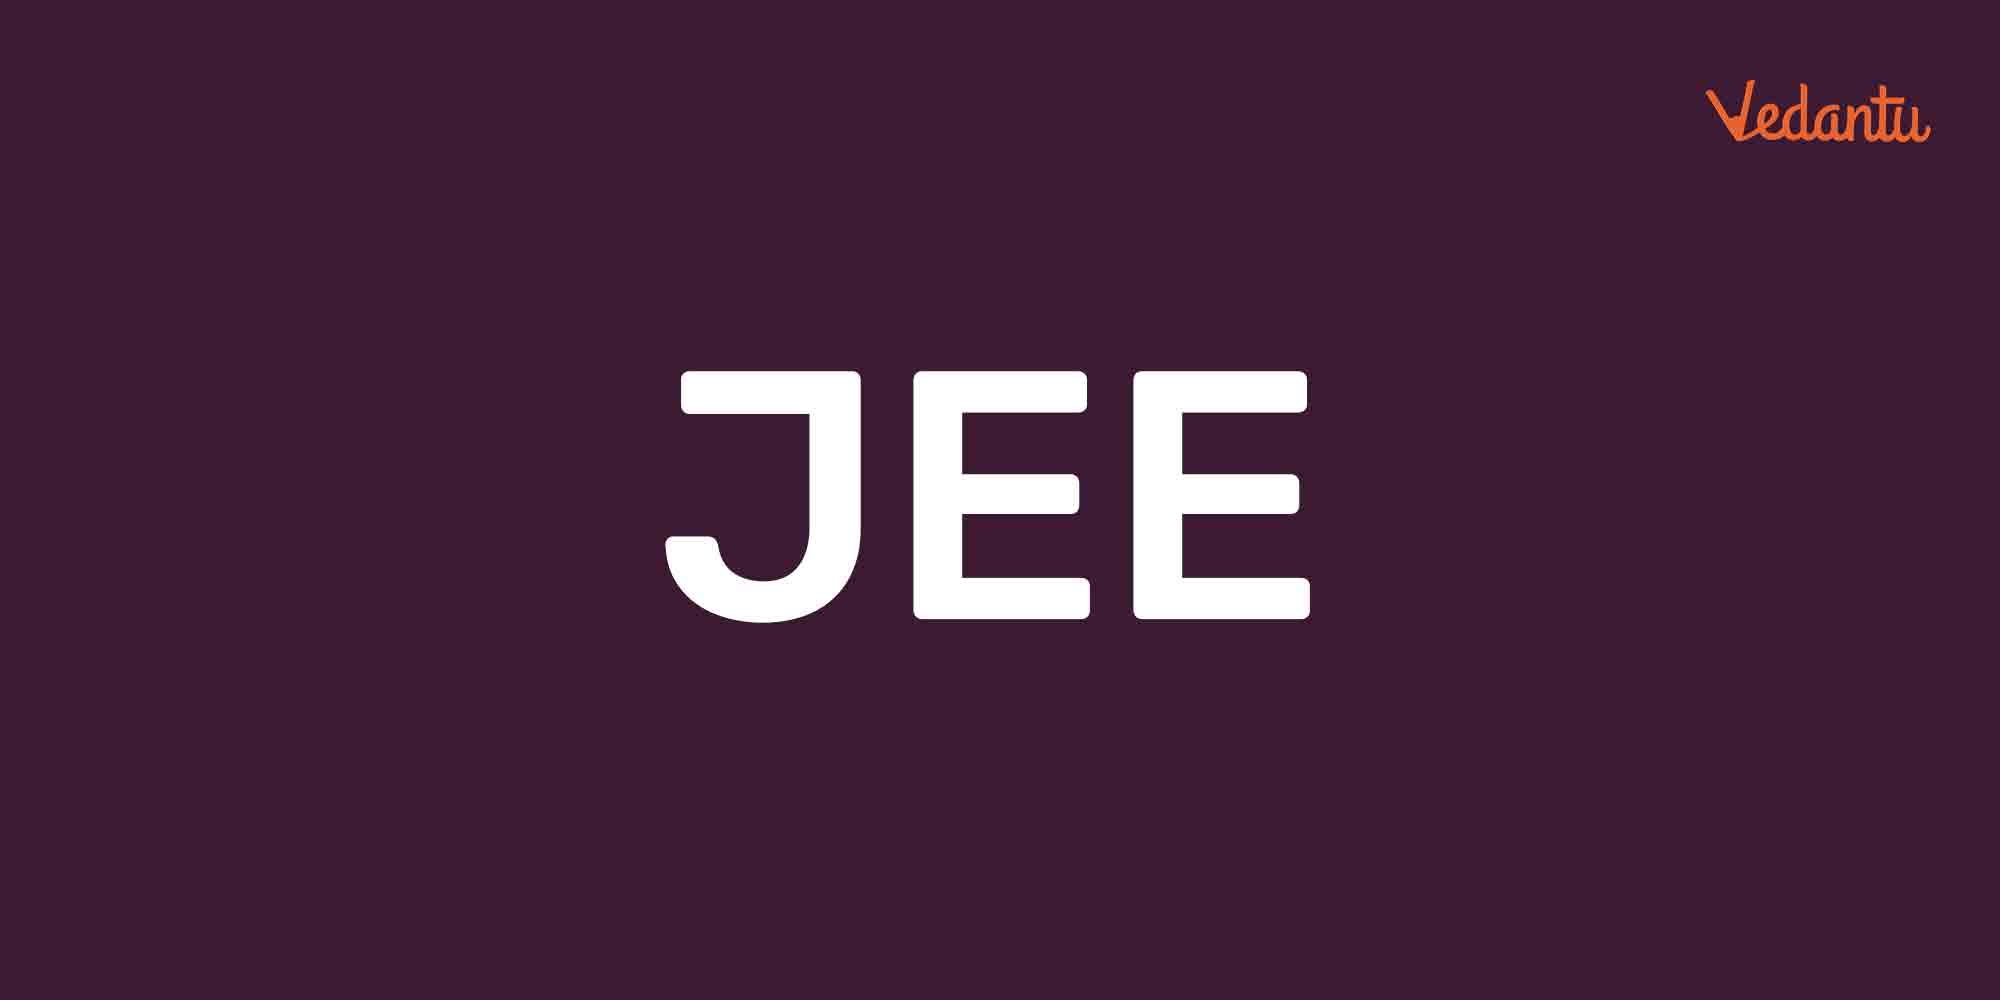 What Should Be the Strategy to Get 200+ in the JEE Main?